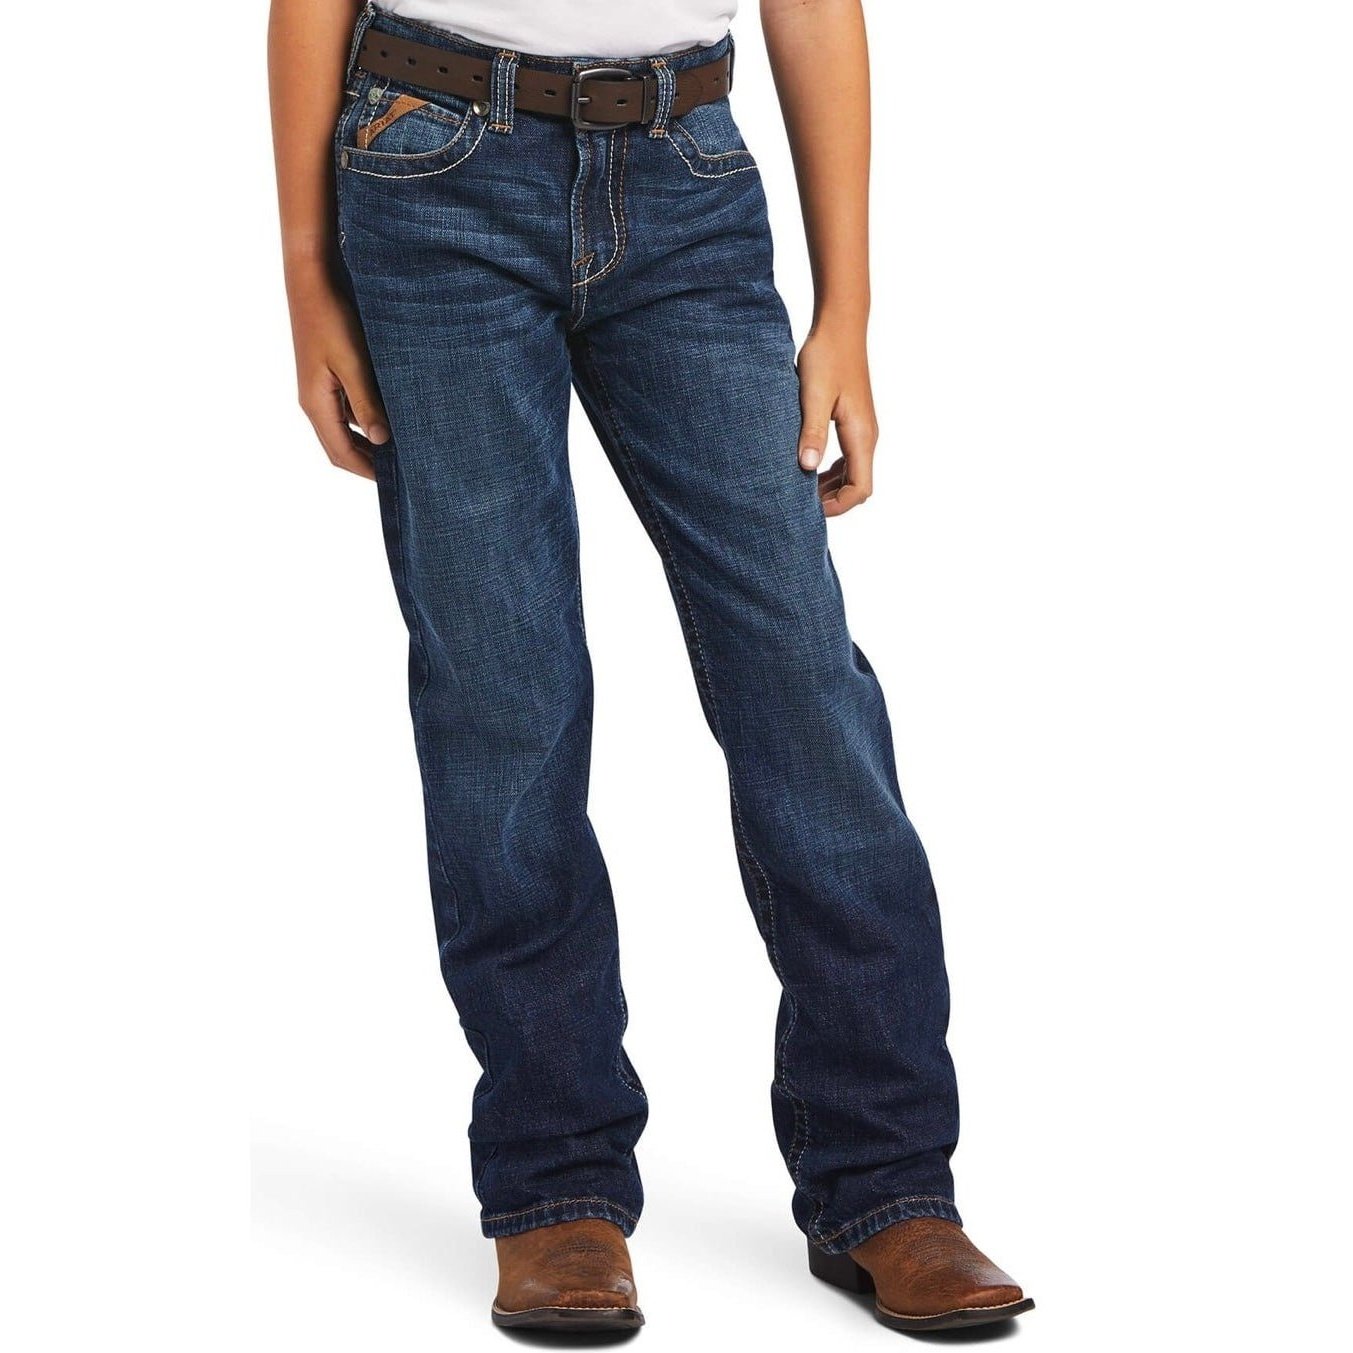 Ariat Boy’s Jeans B4 Relaxed Ramos Boot Cut 10041090 - Ariat